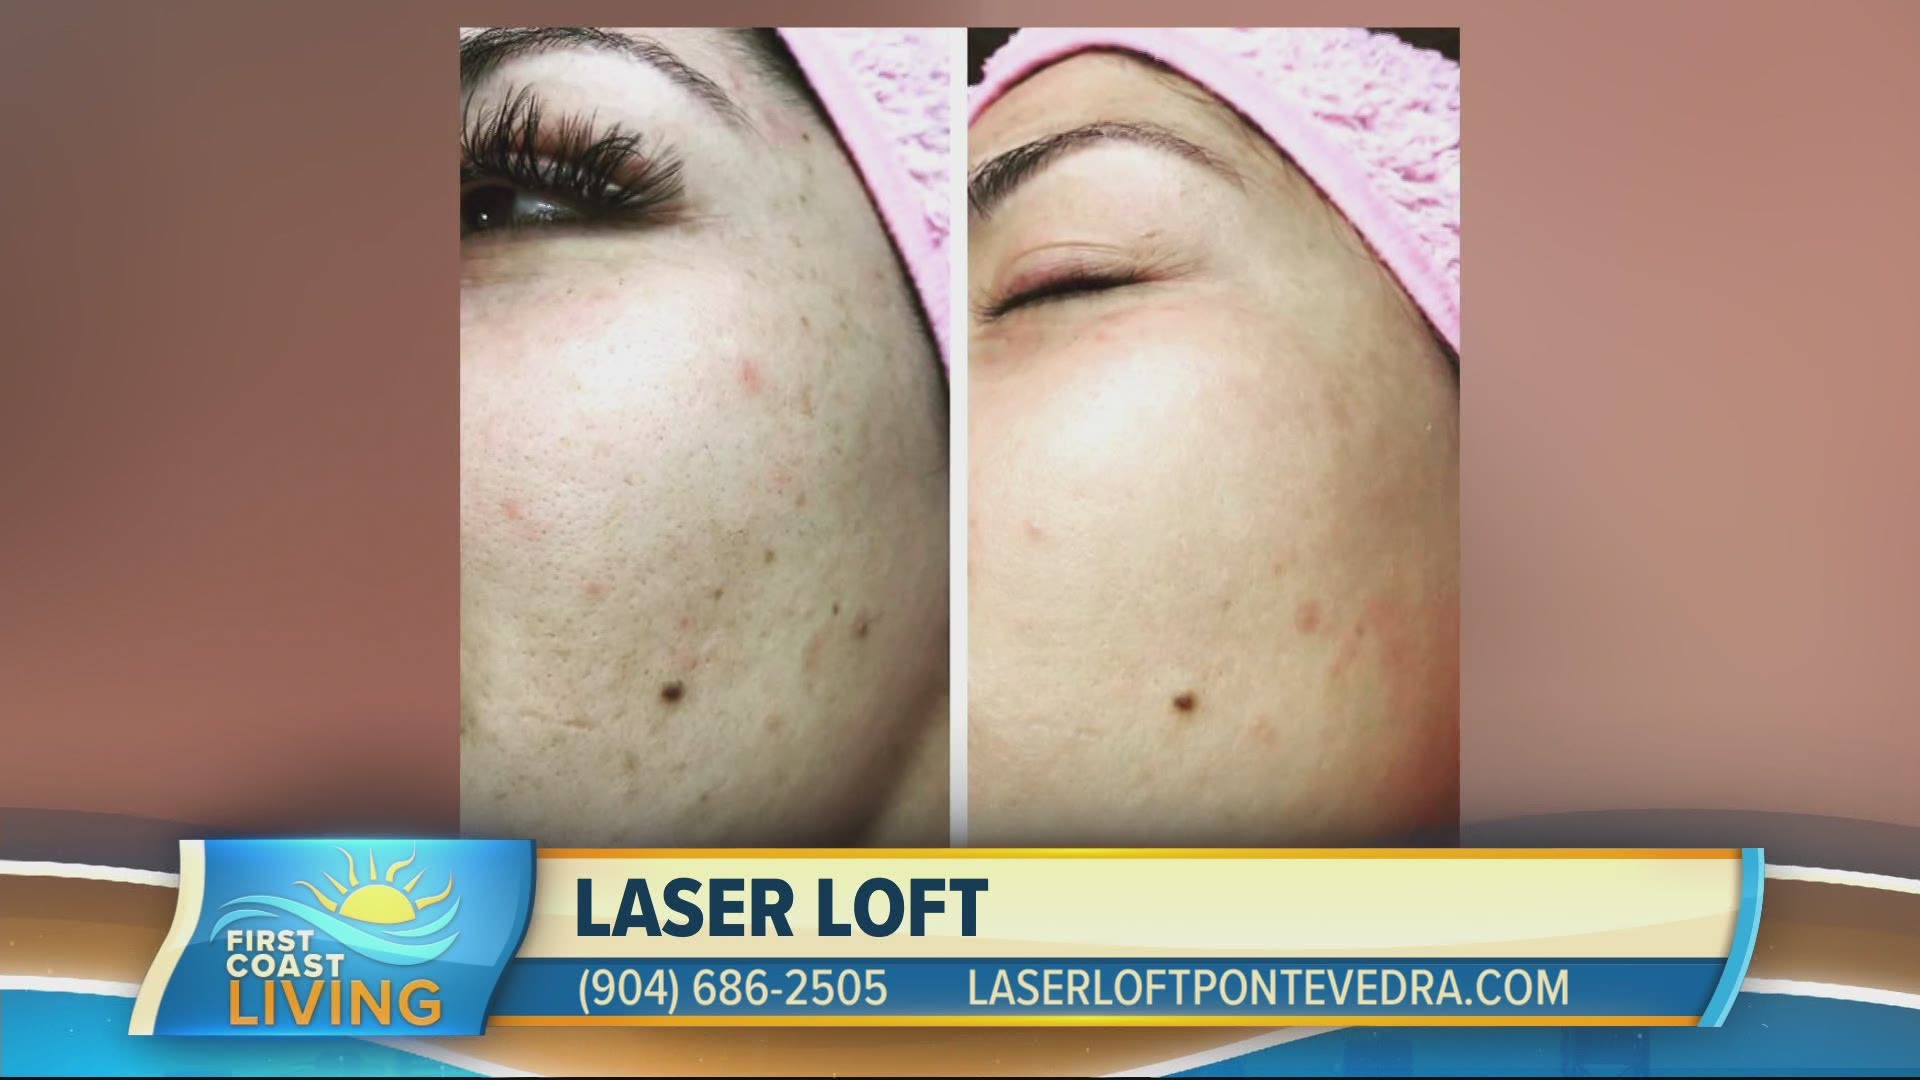 Try this quick non-invasive treatment to breathe life back into your skin at Laser Loft!